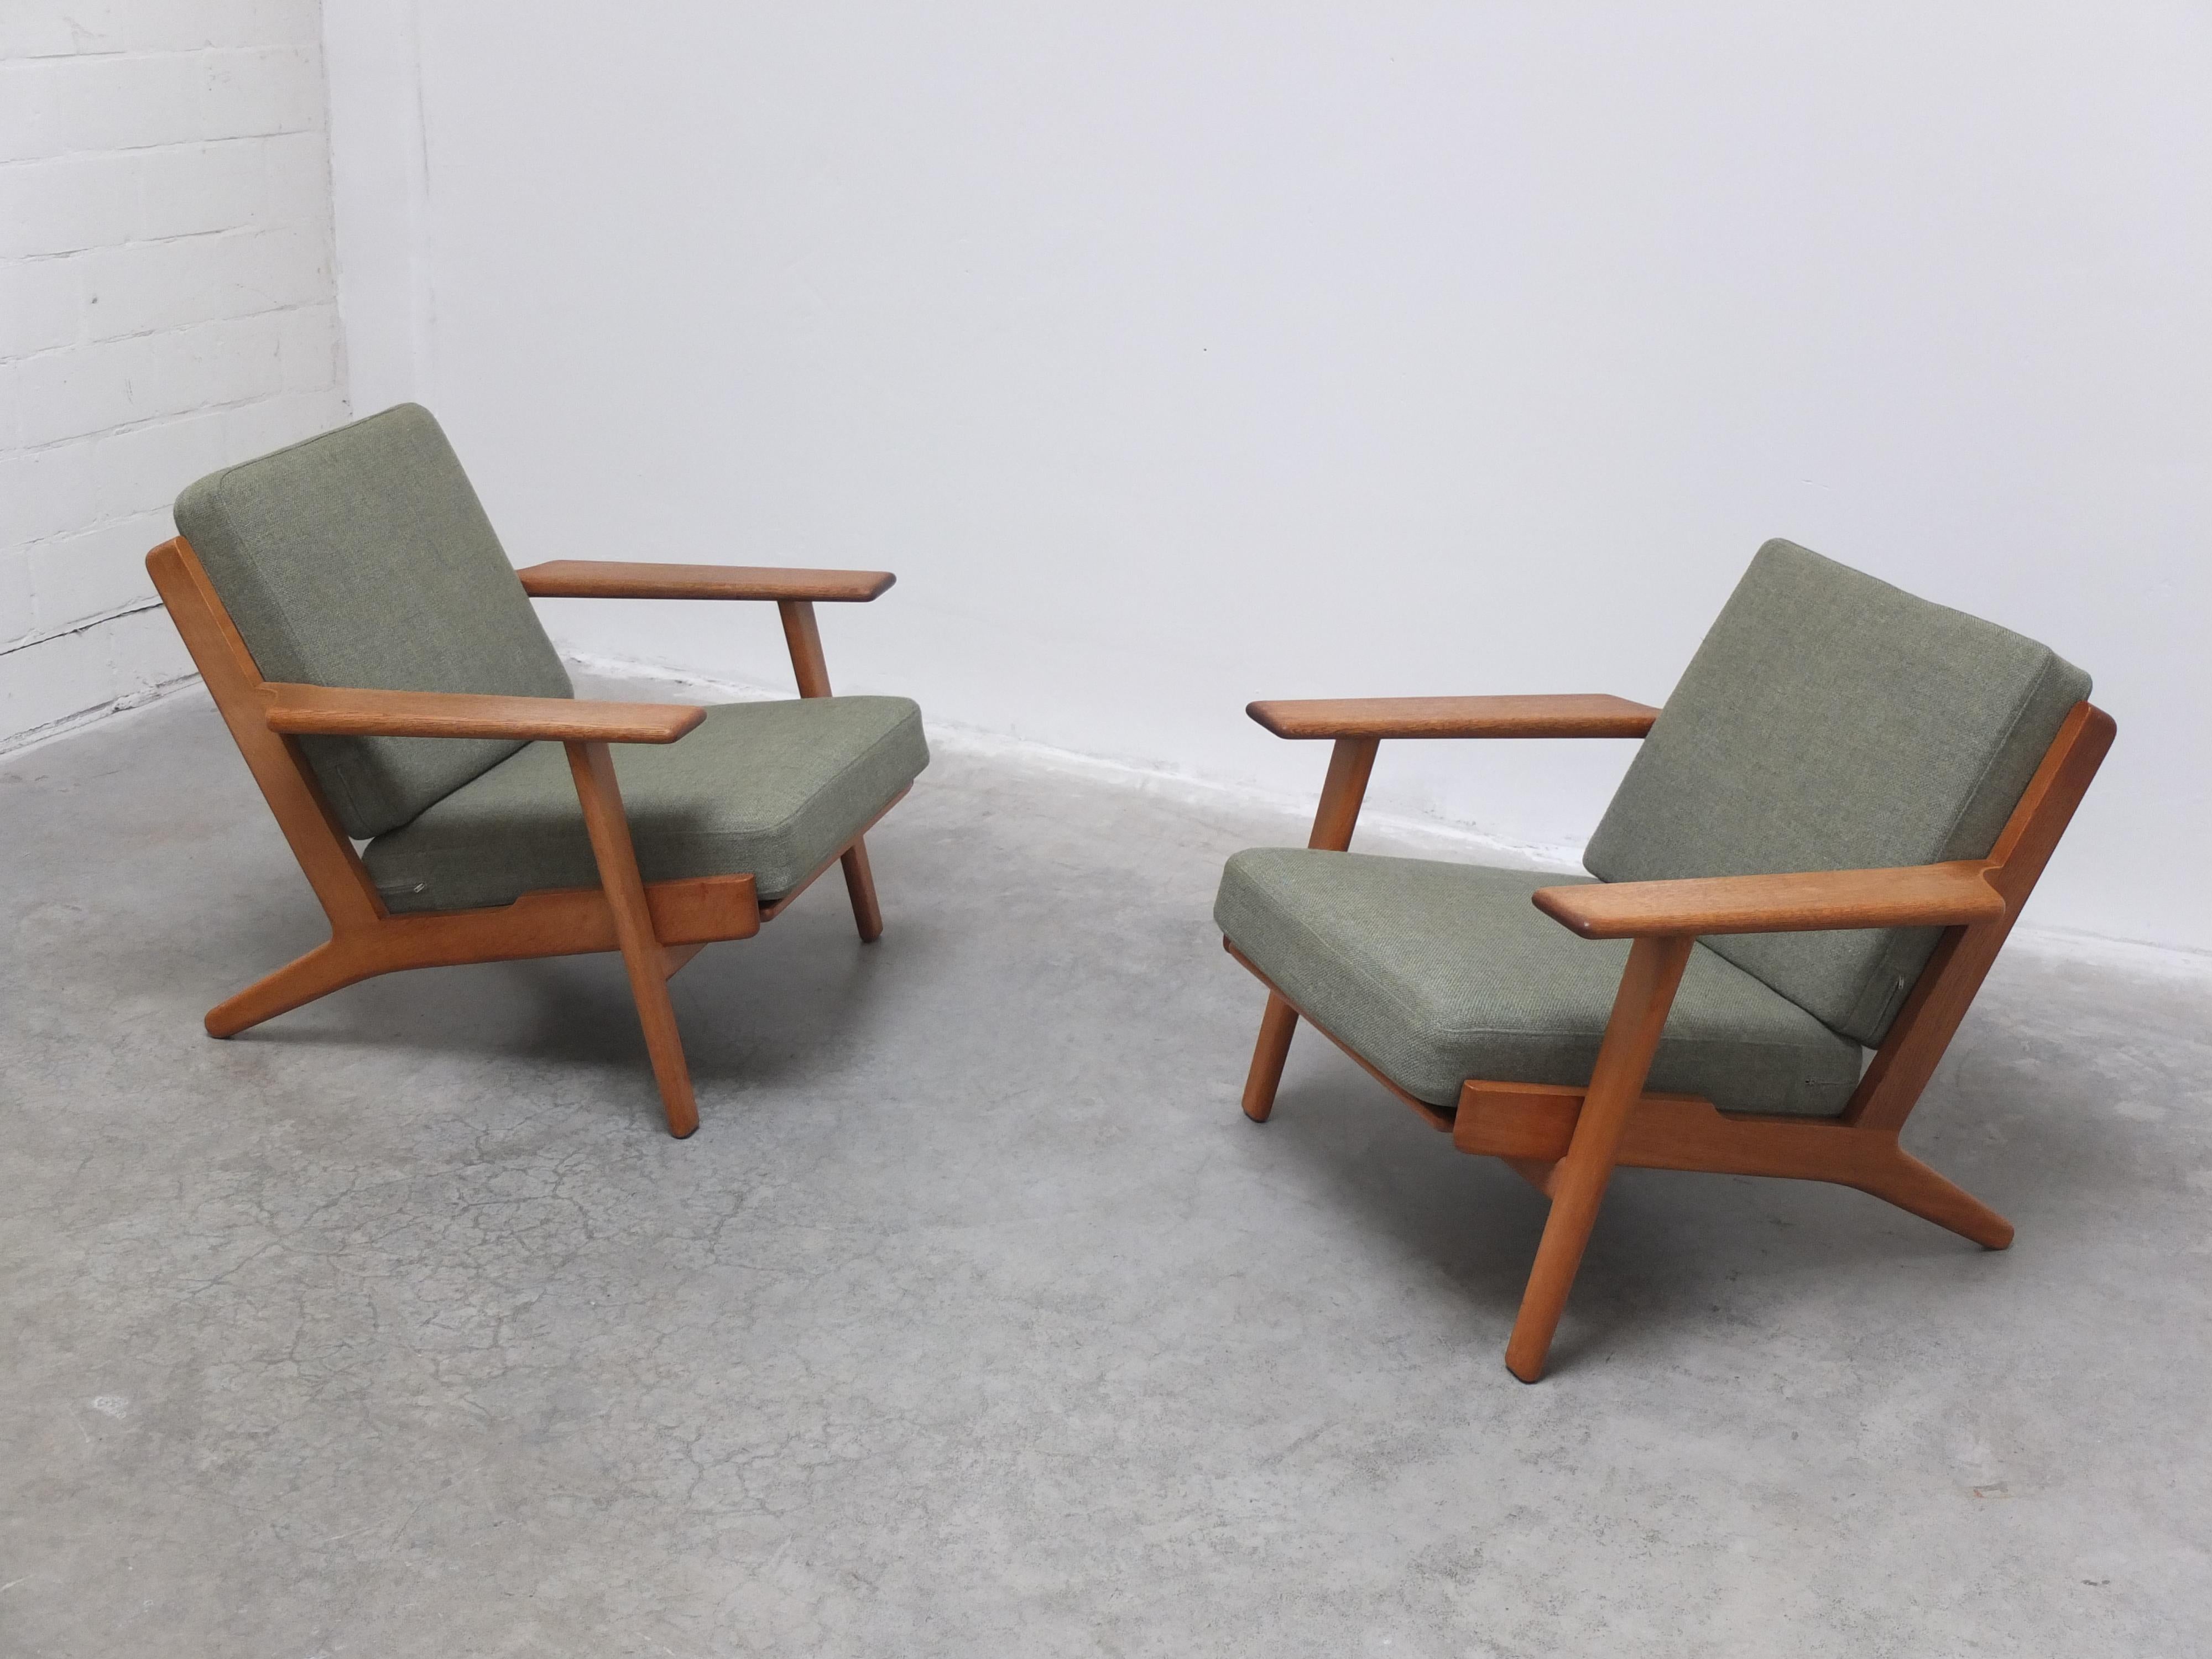 20th Century Early Pair of Oak 'GE-290' Lounge Chairs by Hans Wegner for Getama, 1953 For Sale